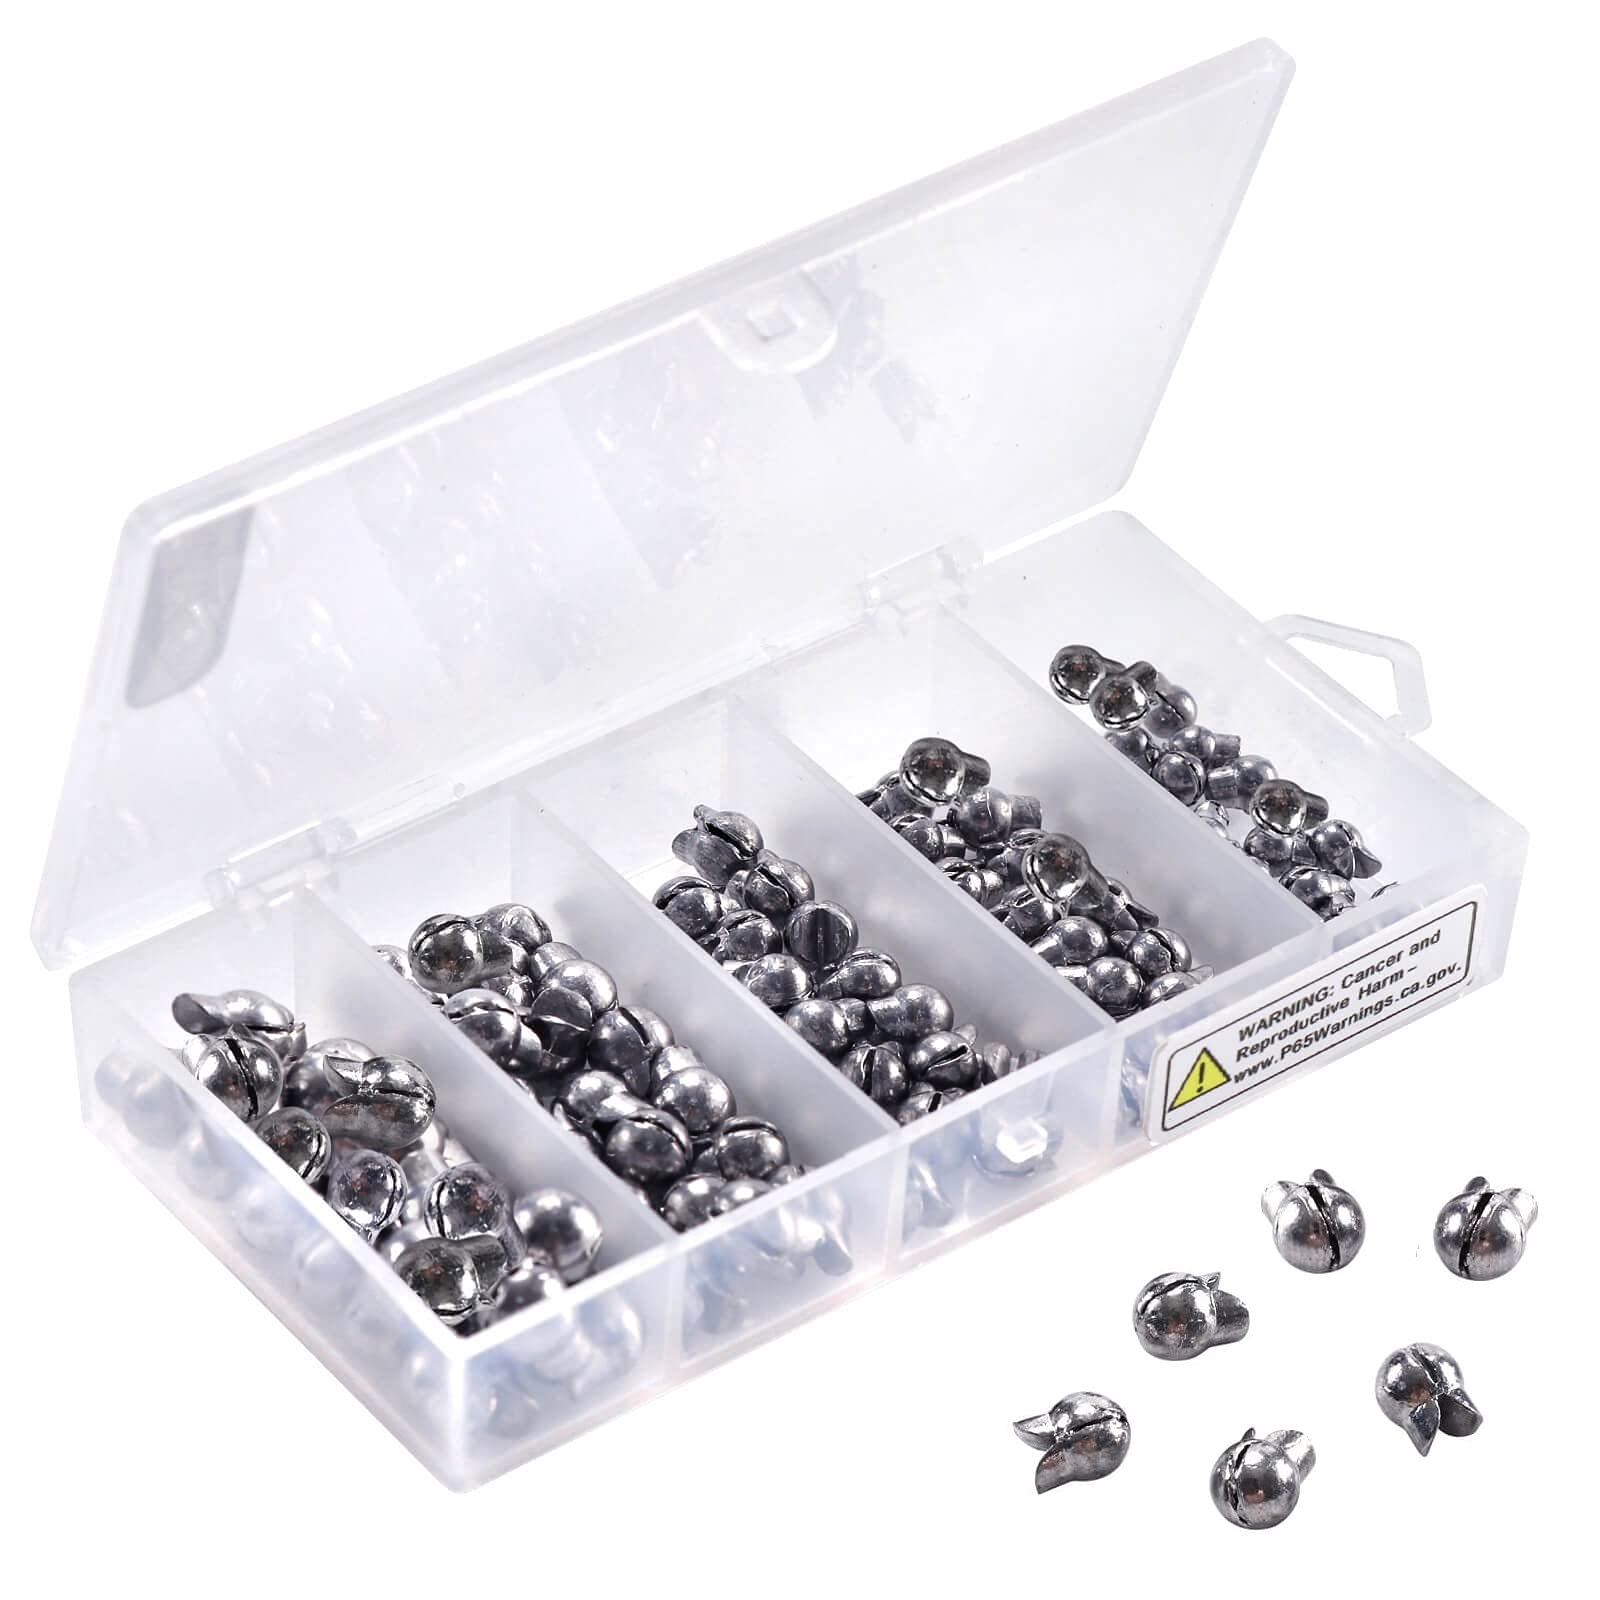 Alwonder 100PCS/Box Removable Split Shot Sinker Kit, 5 Sizes #BB, 3/0, 7,  5, 3, Egg Weights Sinkers Lead Fishing Weights Fishing Line Weight Clip on